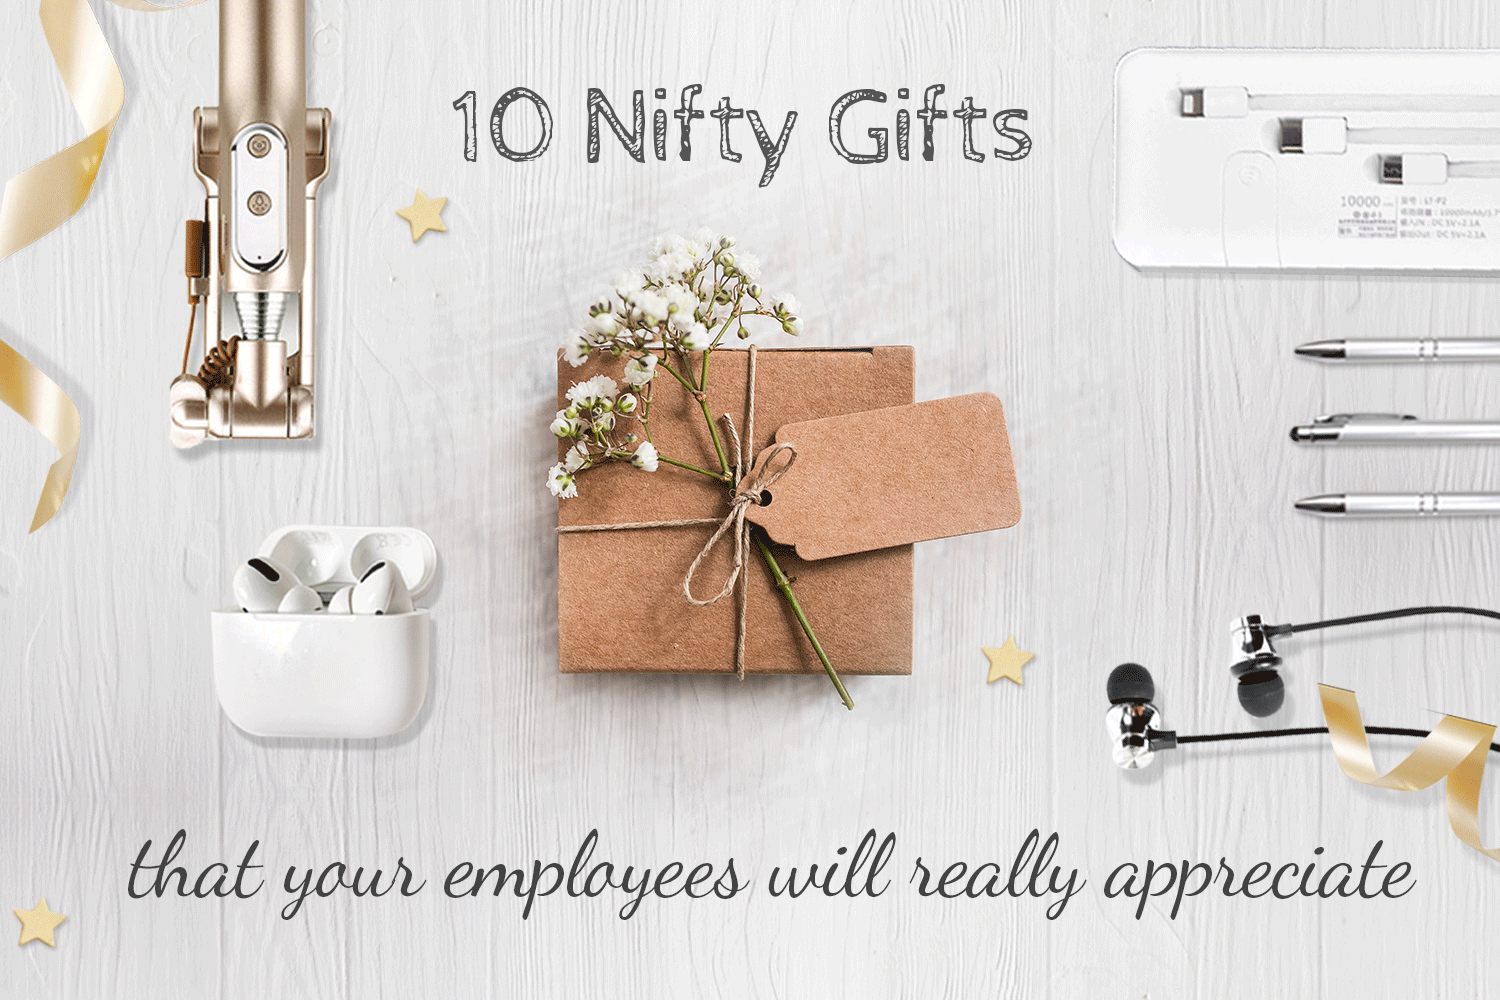 41+ Corporate Gifts Under 10000 PNG